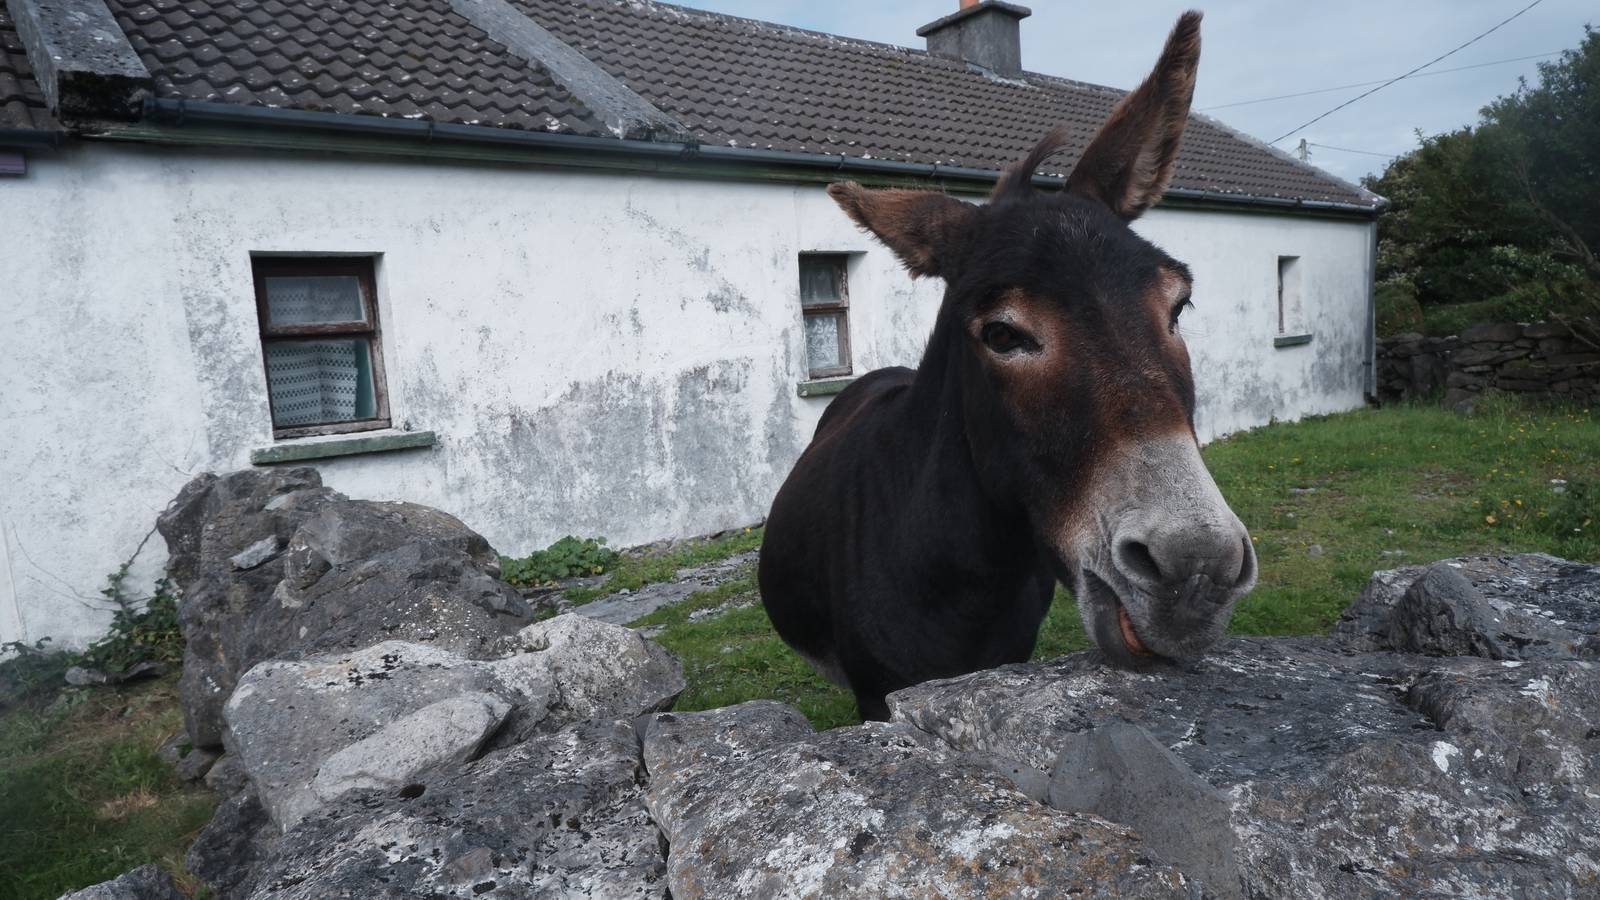 The animals of Inis Meáin